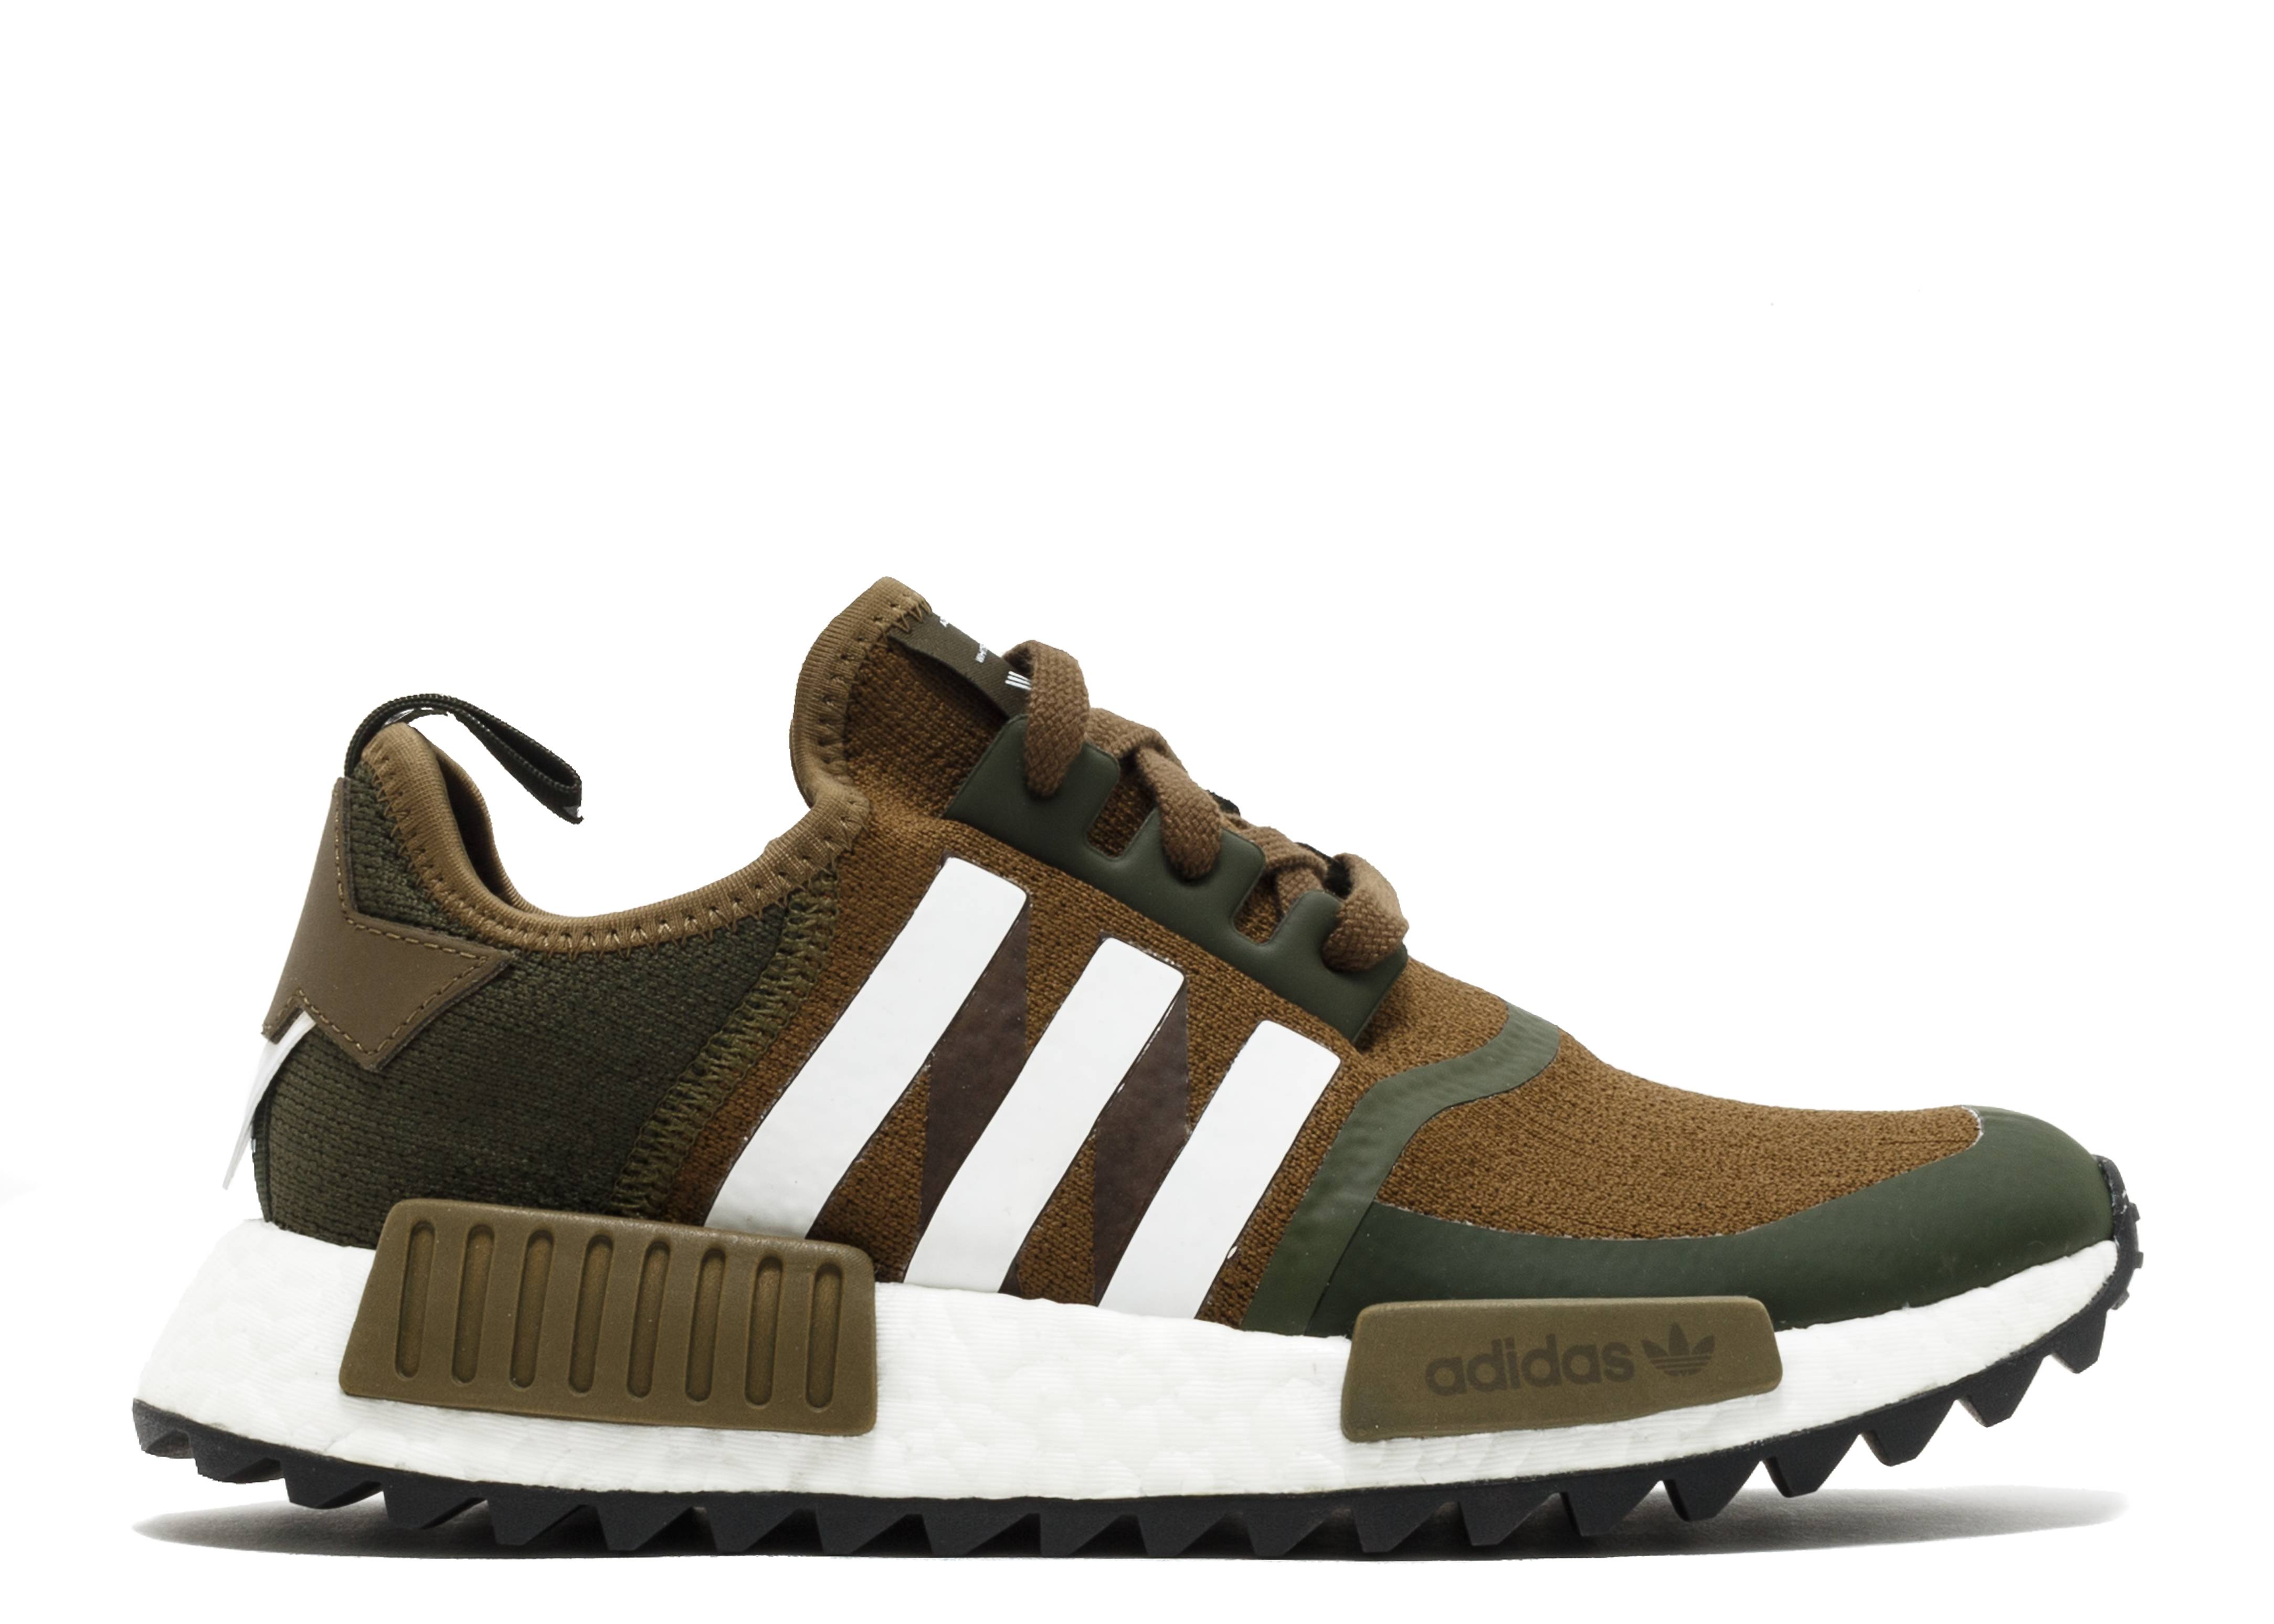 White Mountaineering x NMD_R1 Trail Primeknit 'Olive'